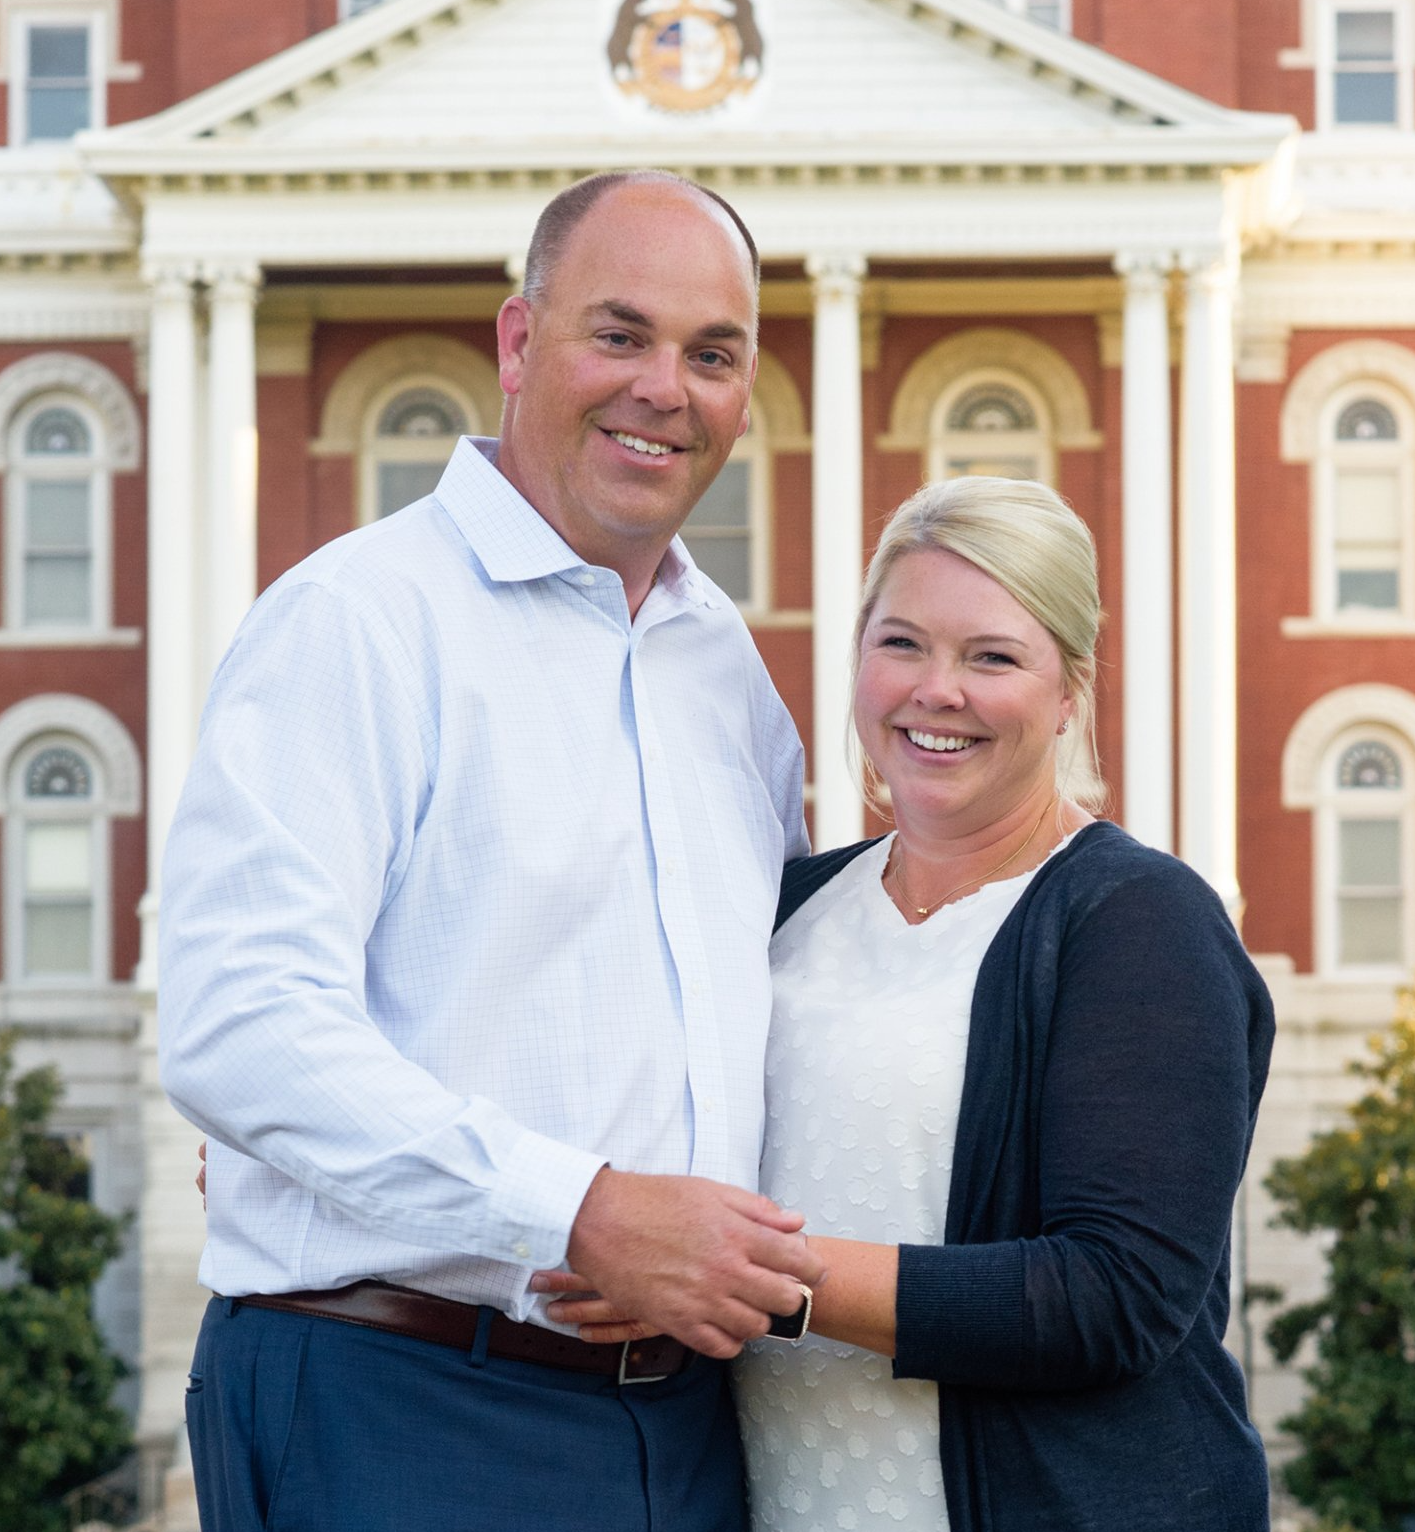 Owners of Atterberry Auction & Realty Company in Mid-Missouri, Tim & Crystal Elliott.